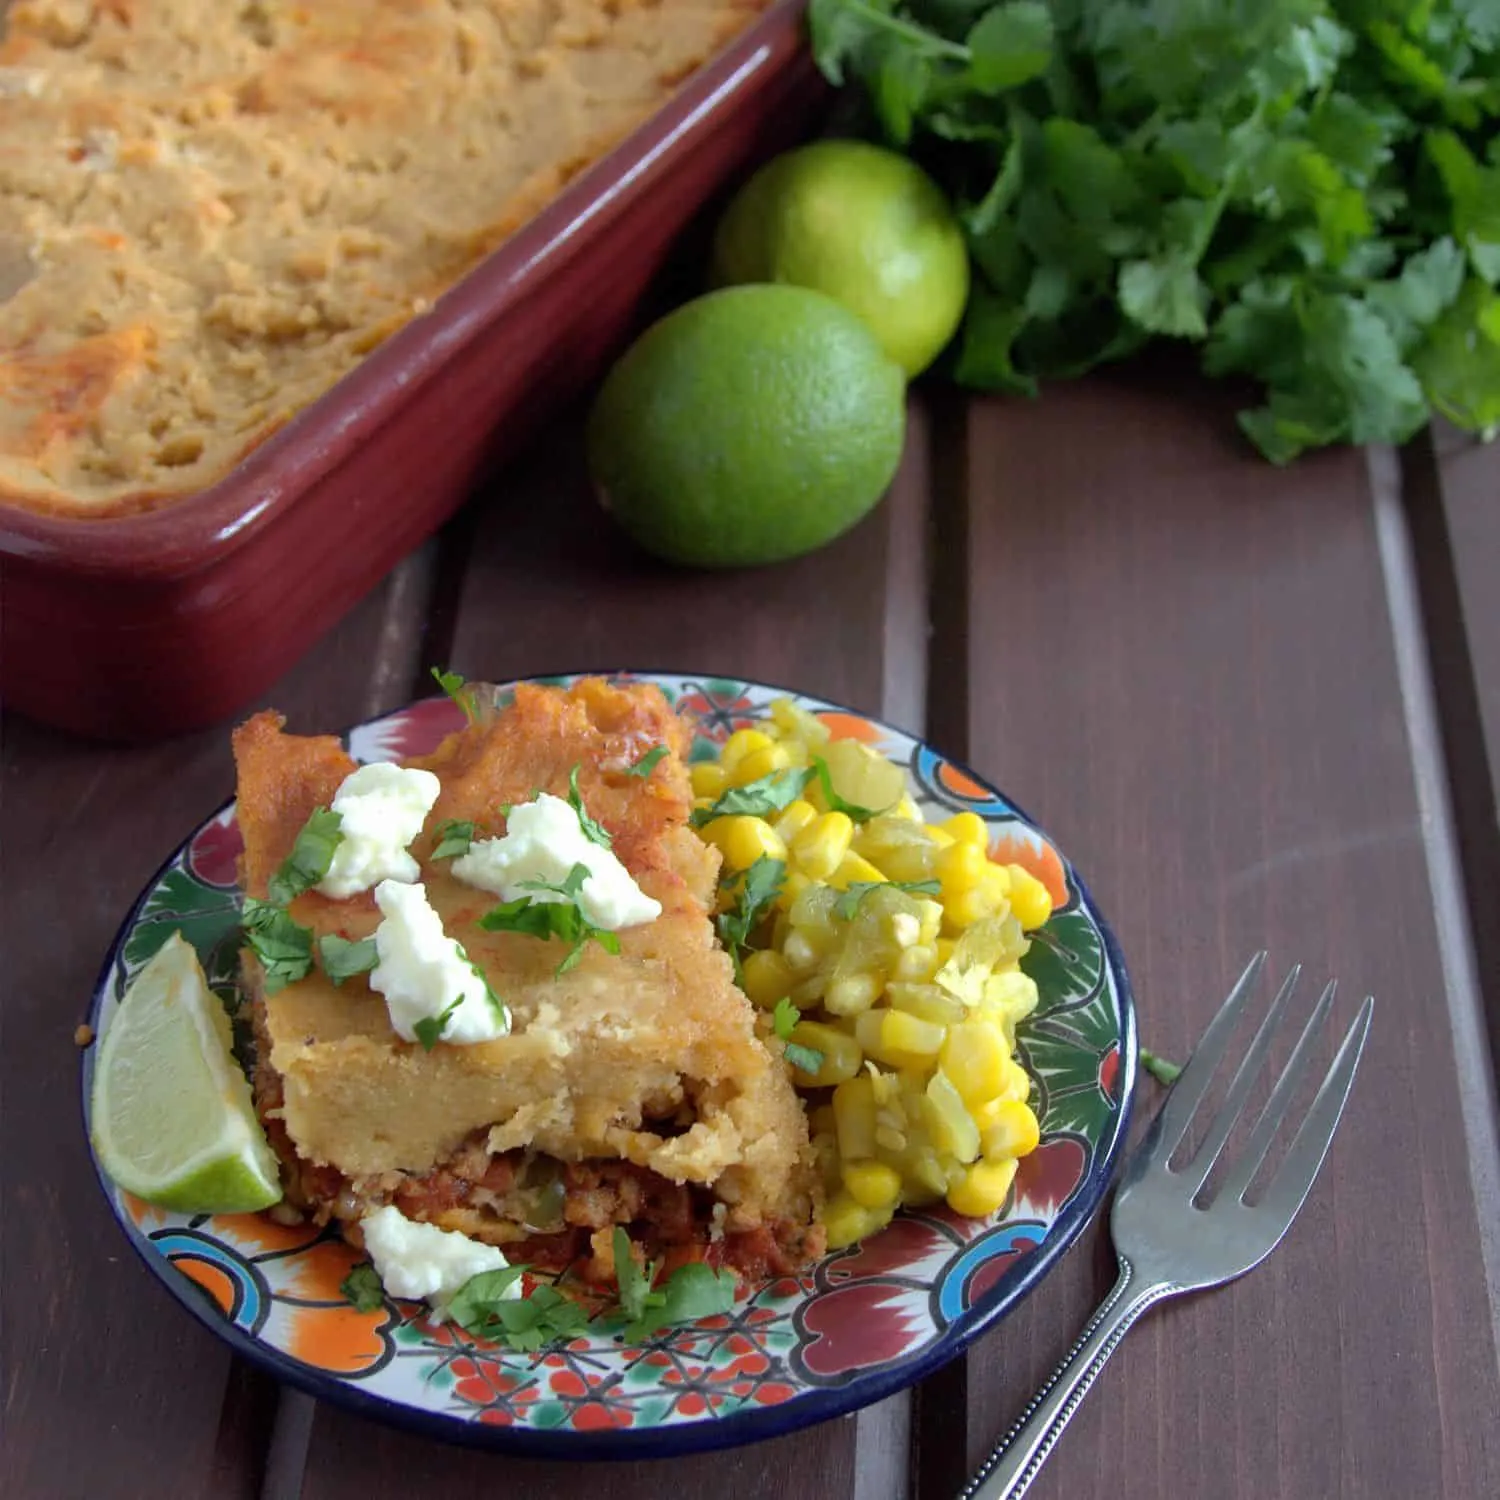 A delicious TexMex casserole, this Adobe Pie (also known as Tamale Pie) is an easier way to enjoy tamale flavors without all the rolling. It's freezer friendly too! 